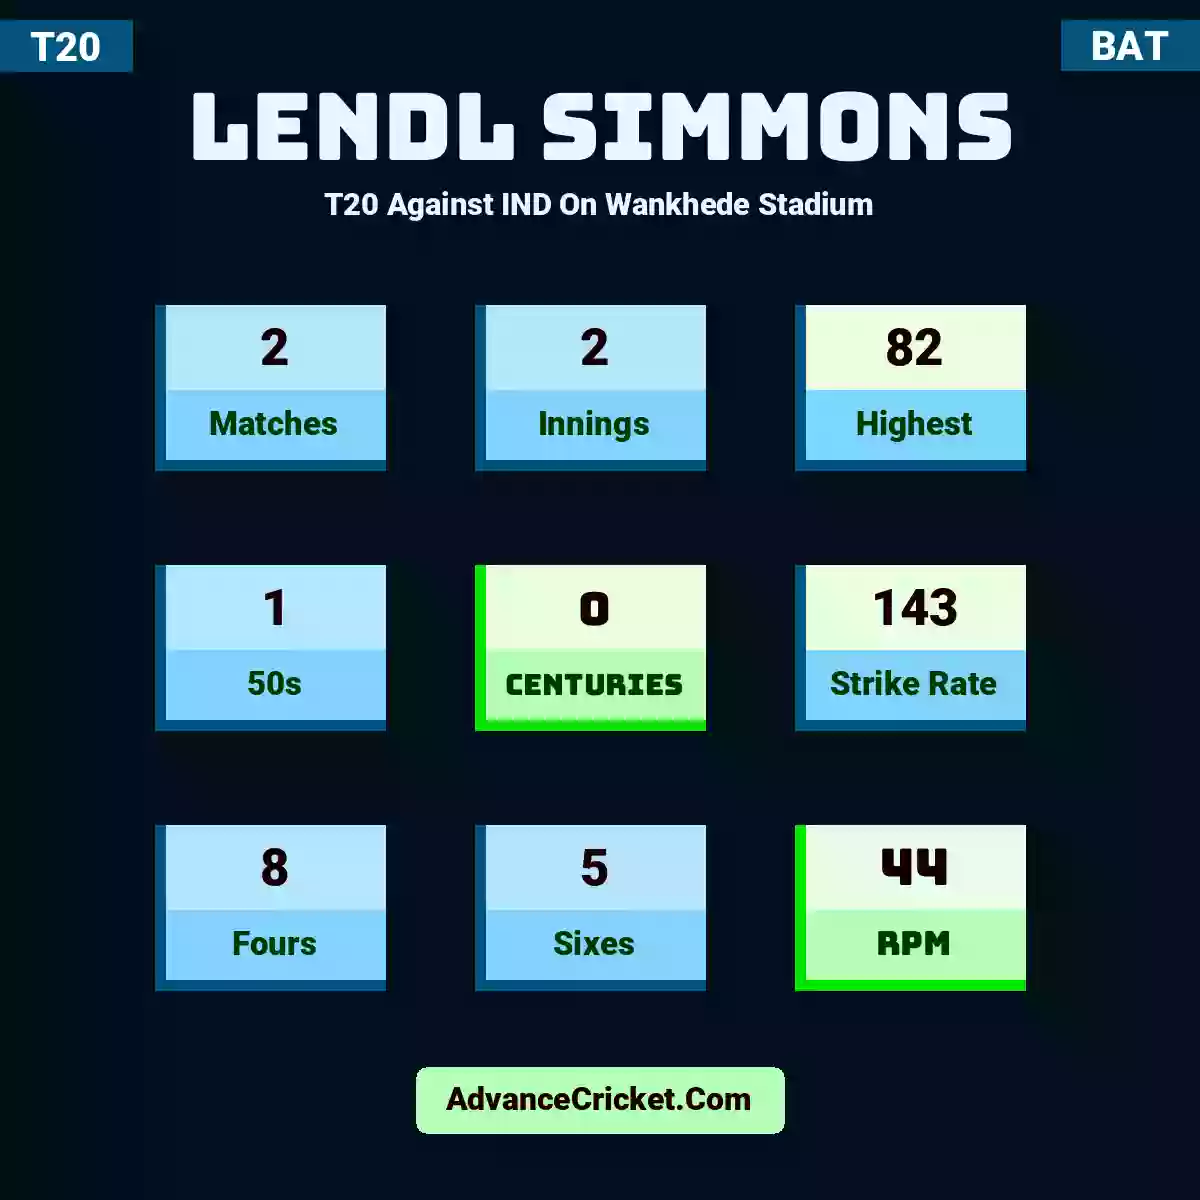 Lendl Simmons T20  Against IND On Wankhede Stadium, Lendl Simmons played 2 matches, scored 82 runs as highest, 1 half-centuries, and 0 centuries, with a strike rate of 143. L.Simmons hit 8 fours and 5 sixes, with an RPM of 44.